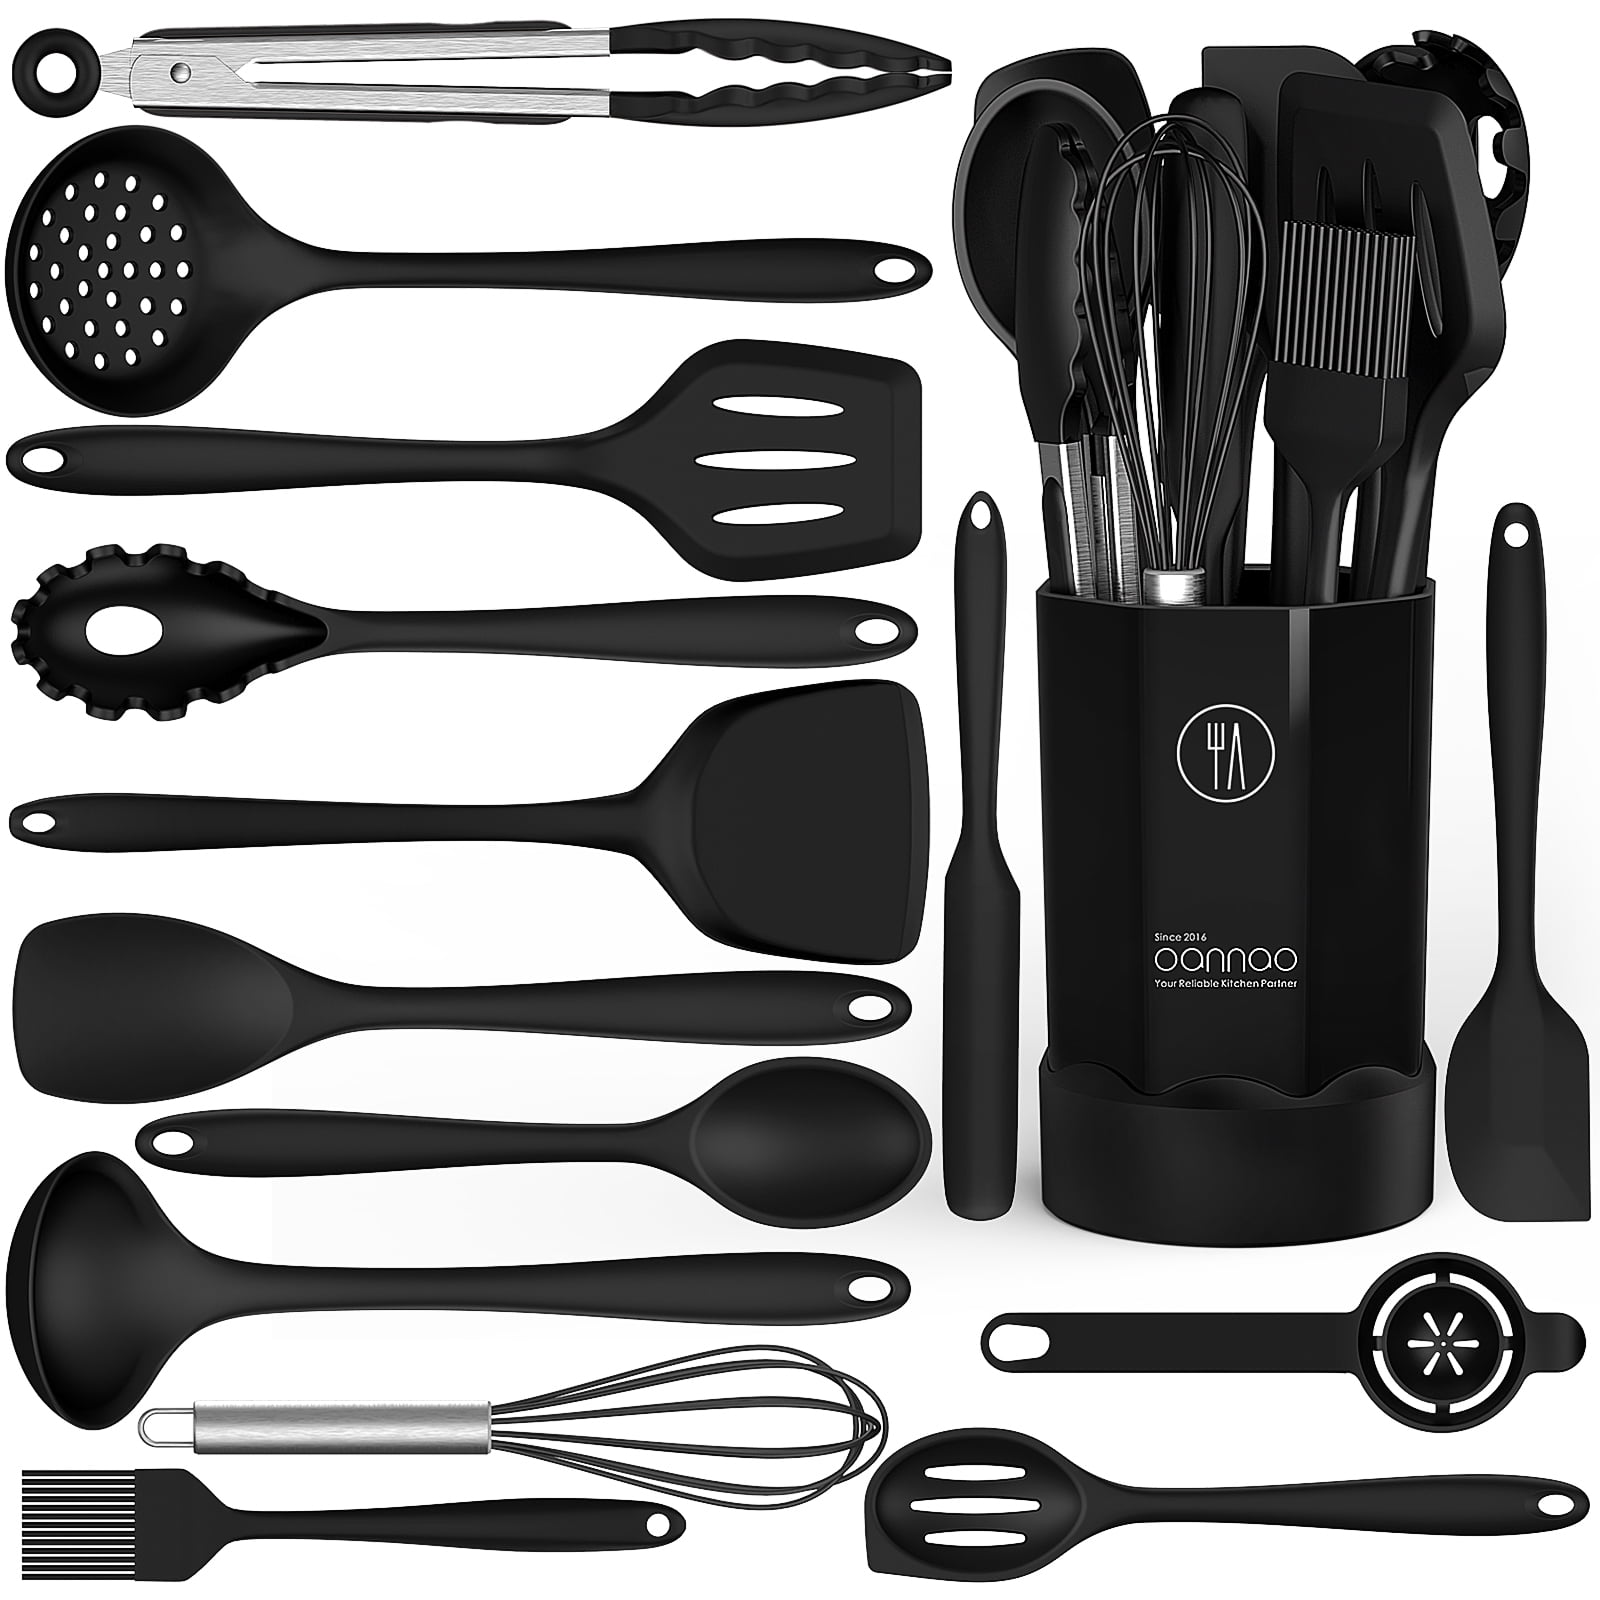 Silicone Cooking Utensils Set - 446°F Heat Resistant Silicone Kitchen  Utensils for Cooking,Kitchen U…See more Silicone Cooking Utensils Set -  446°F